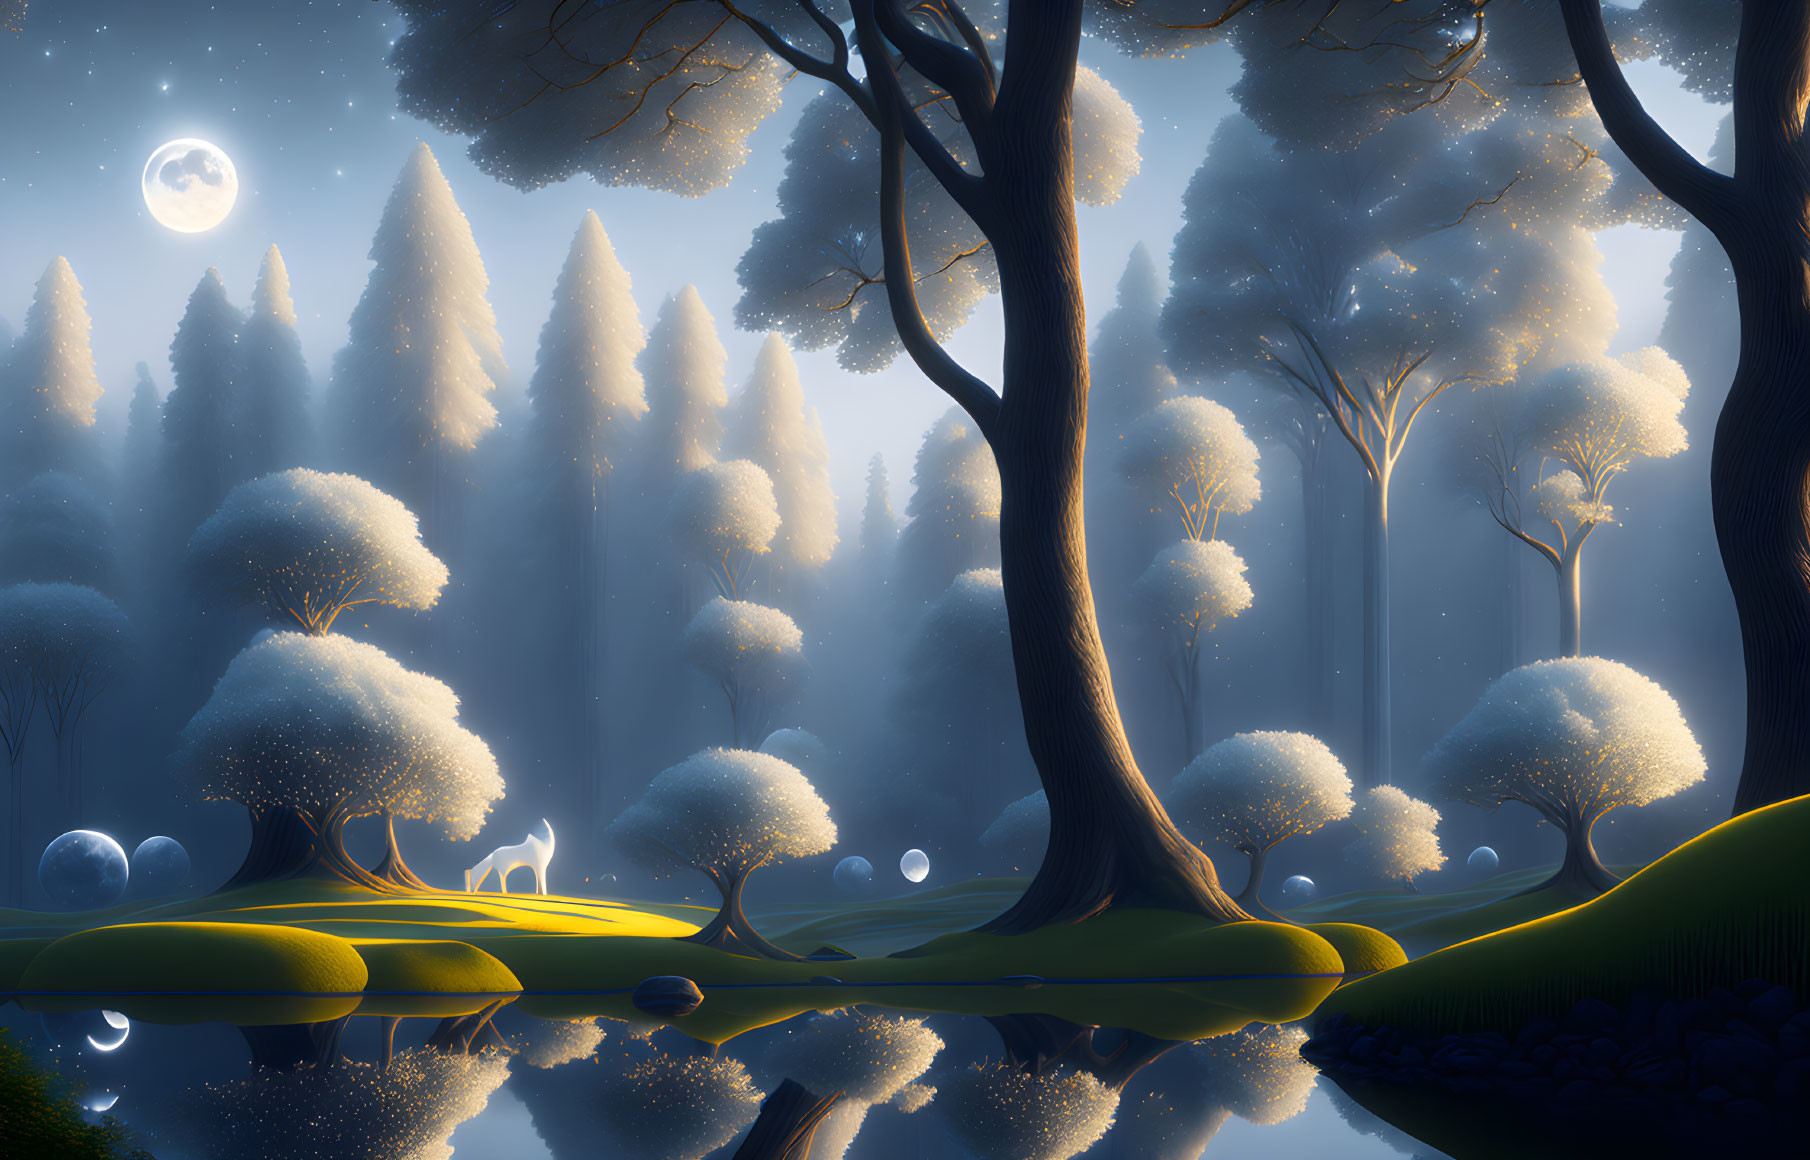 Tranquil nighttime landscape with glowing trees, full moon, and misty forest